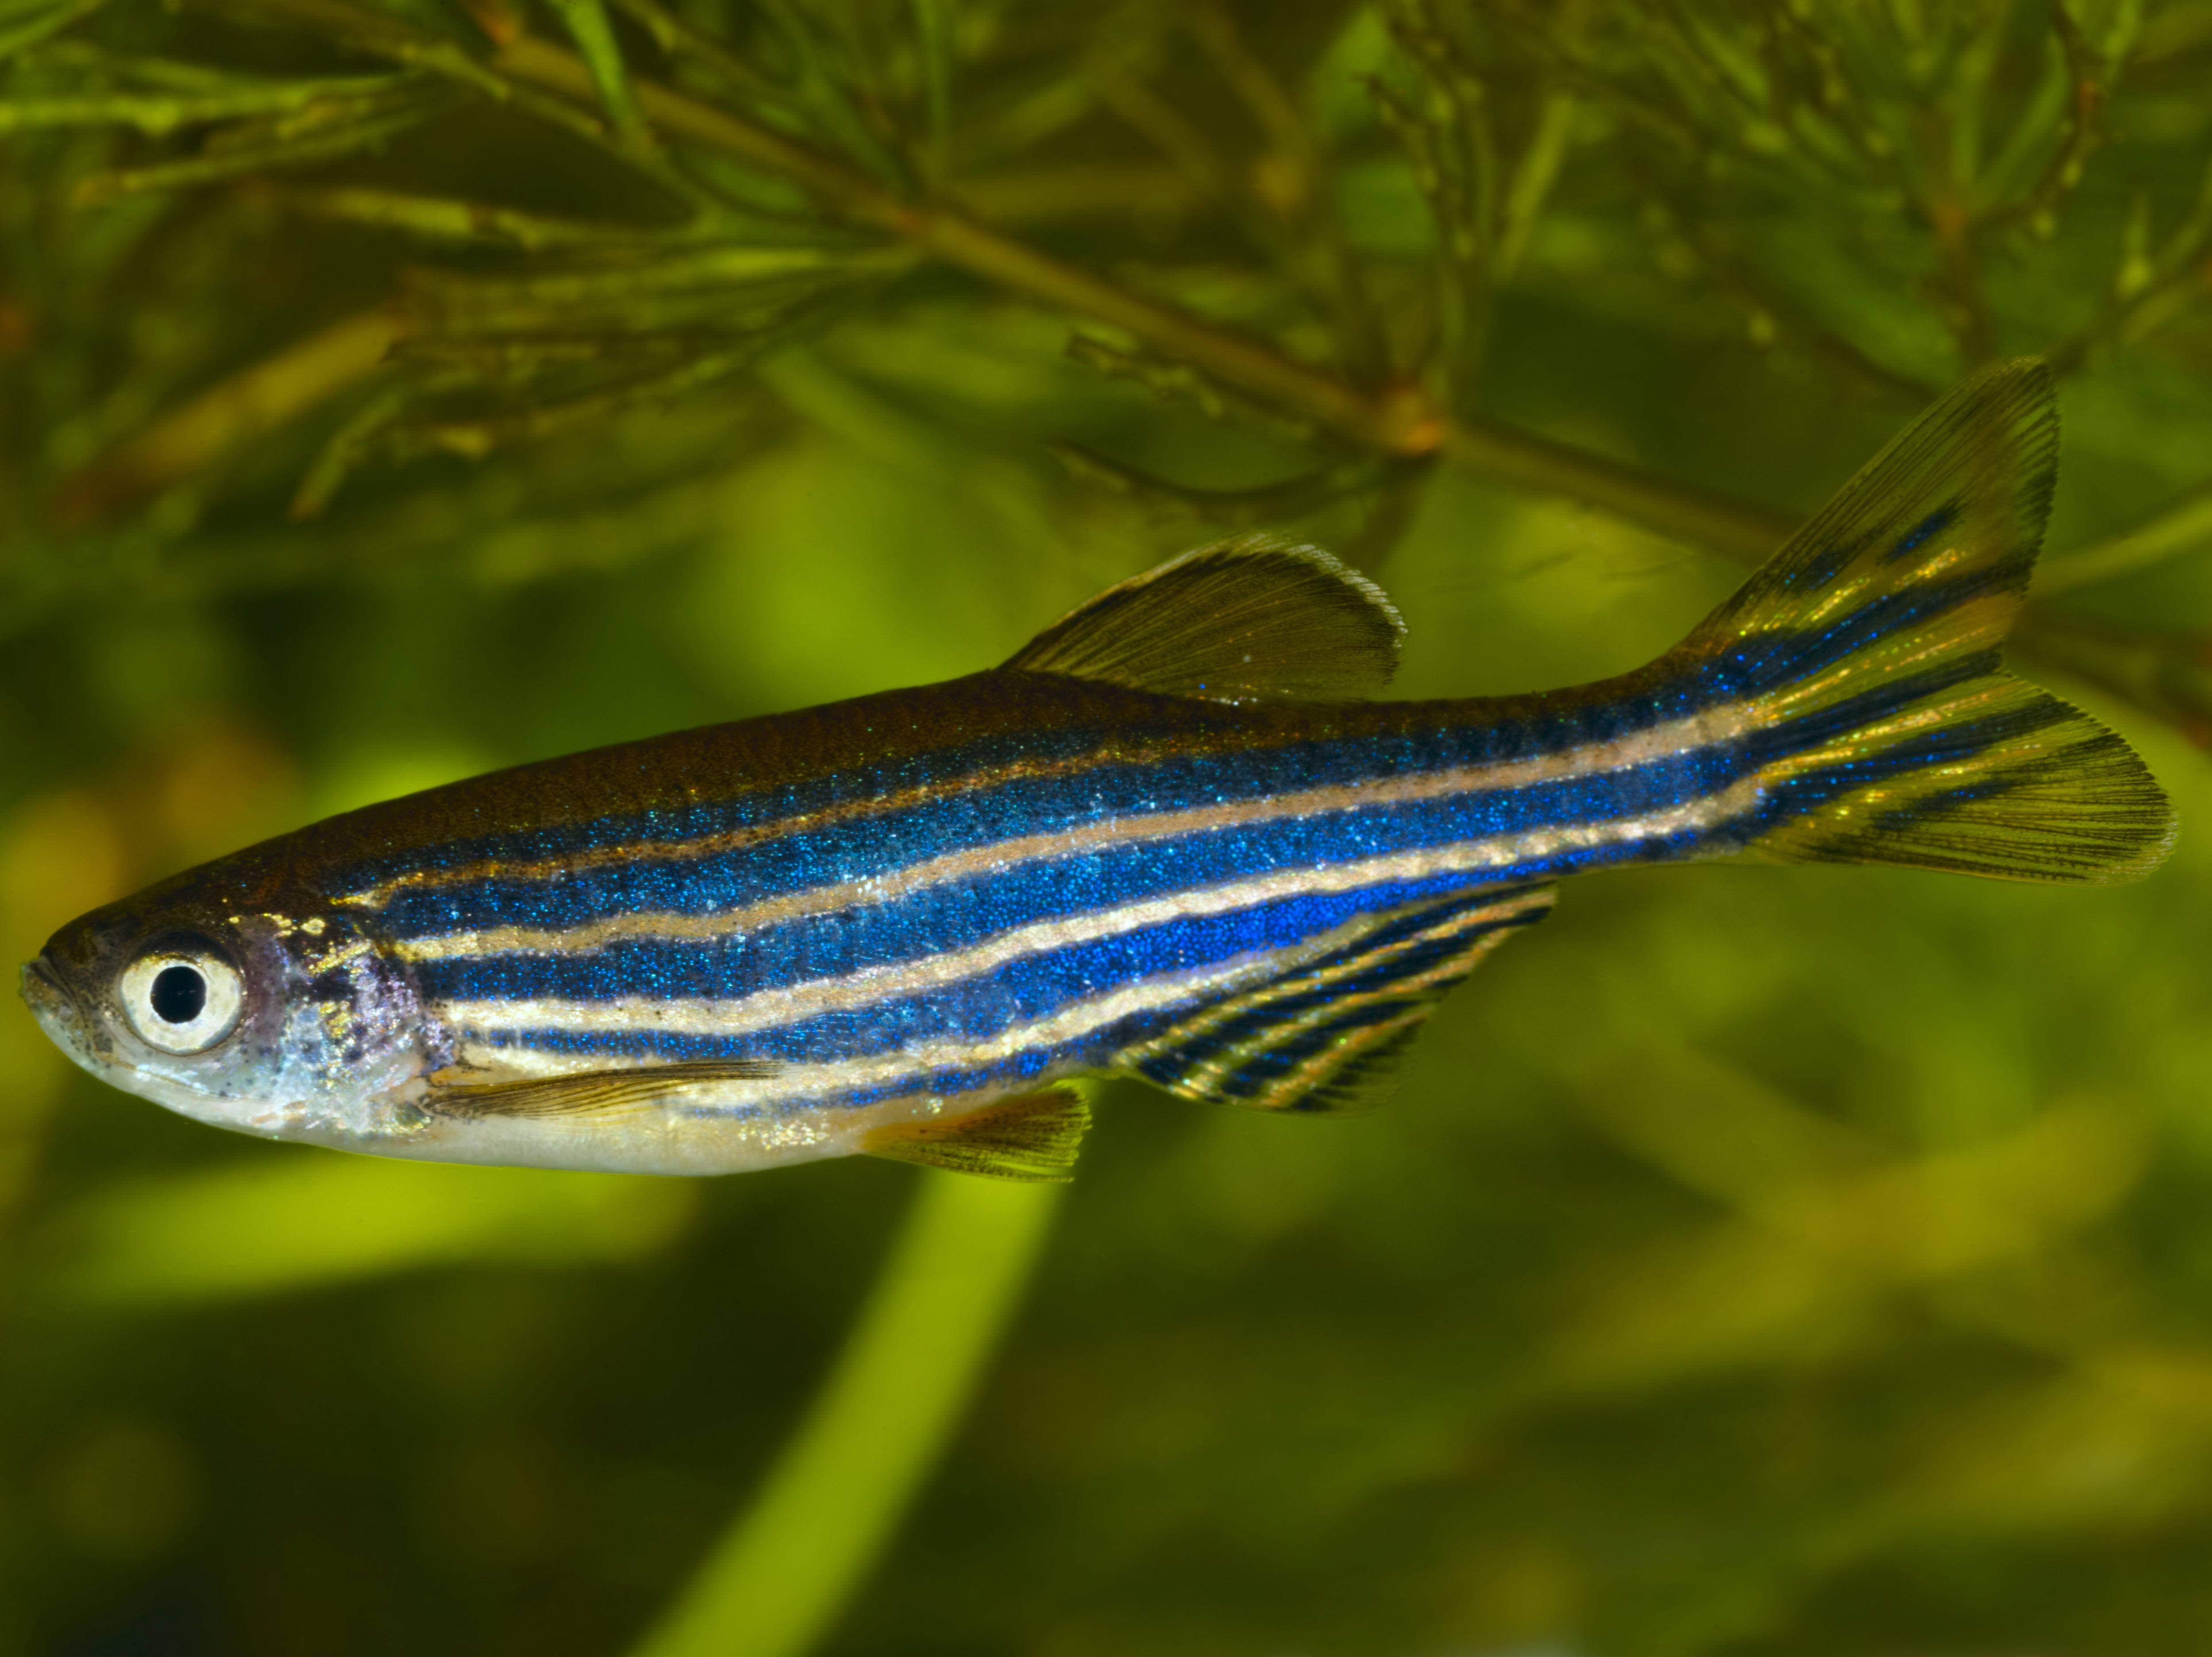 Researchers visited seven zebrafish sites in India to study their behaviour